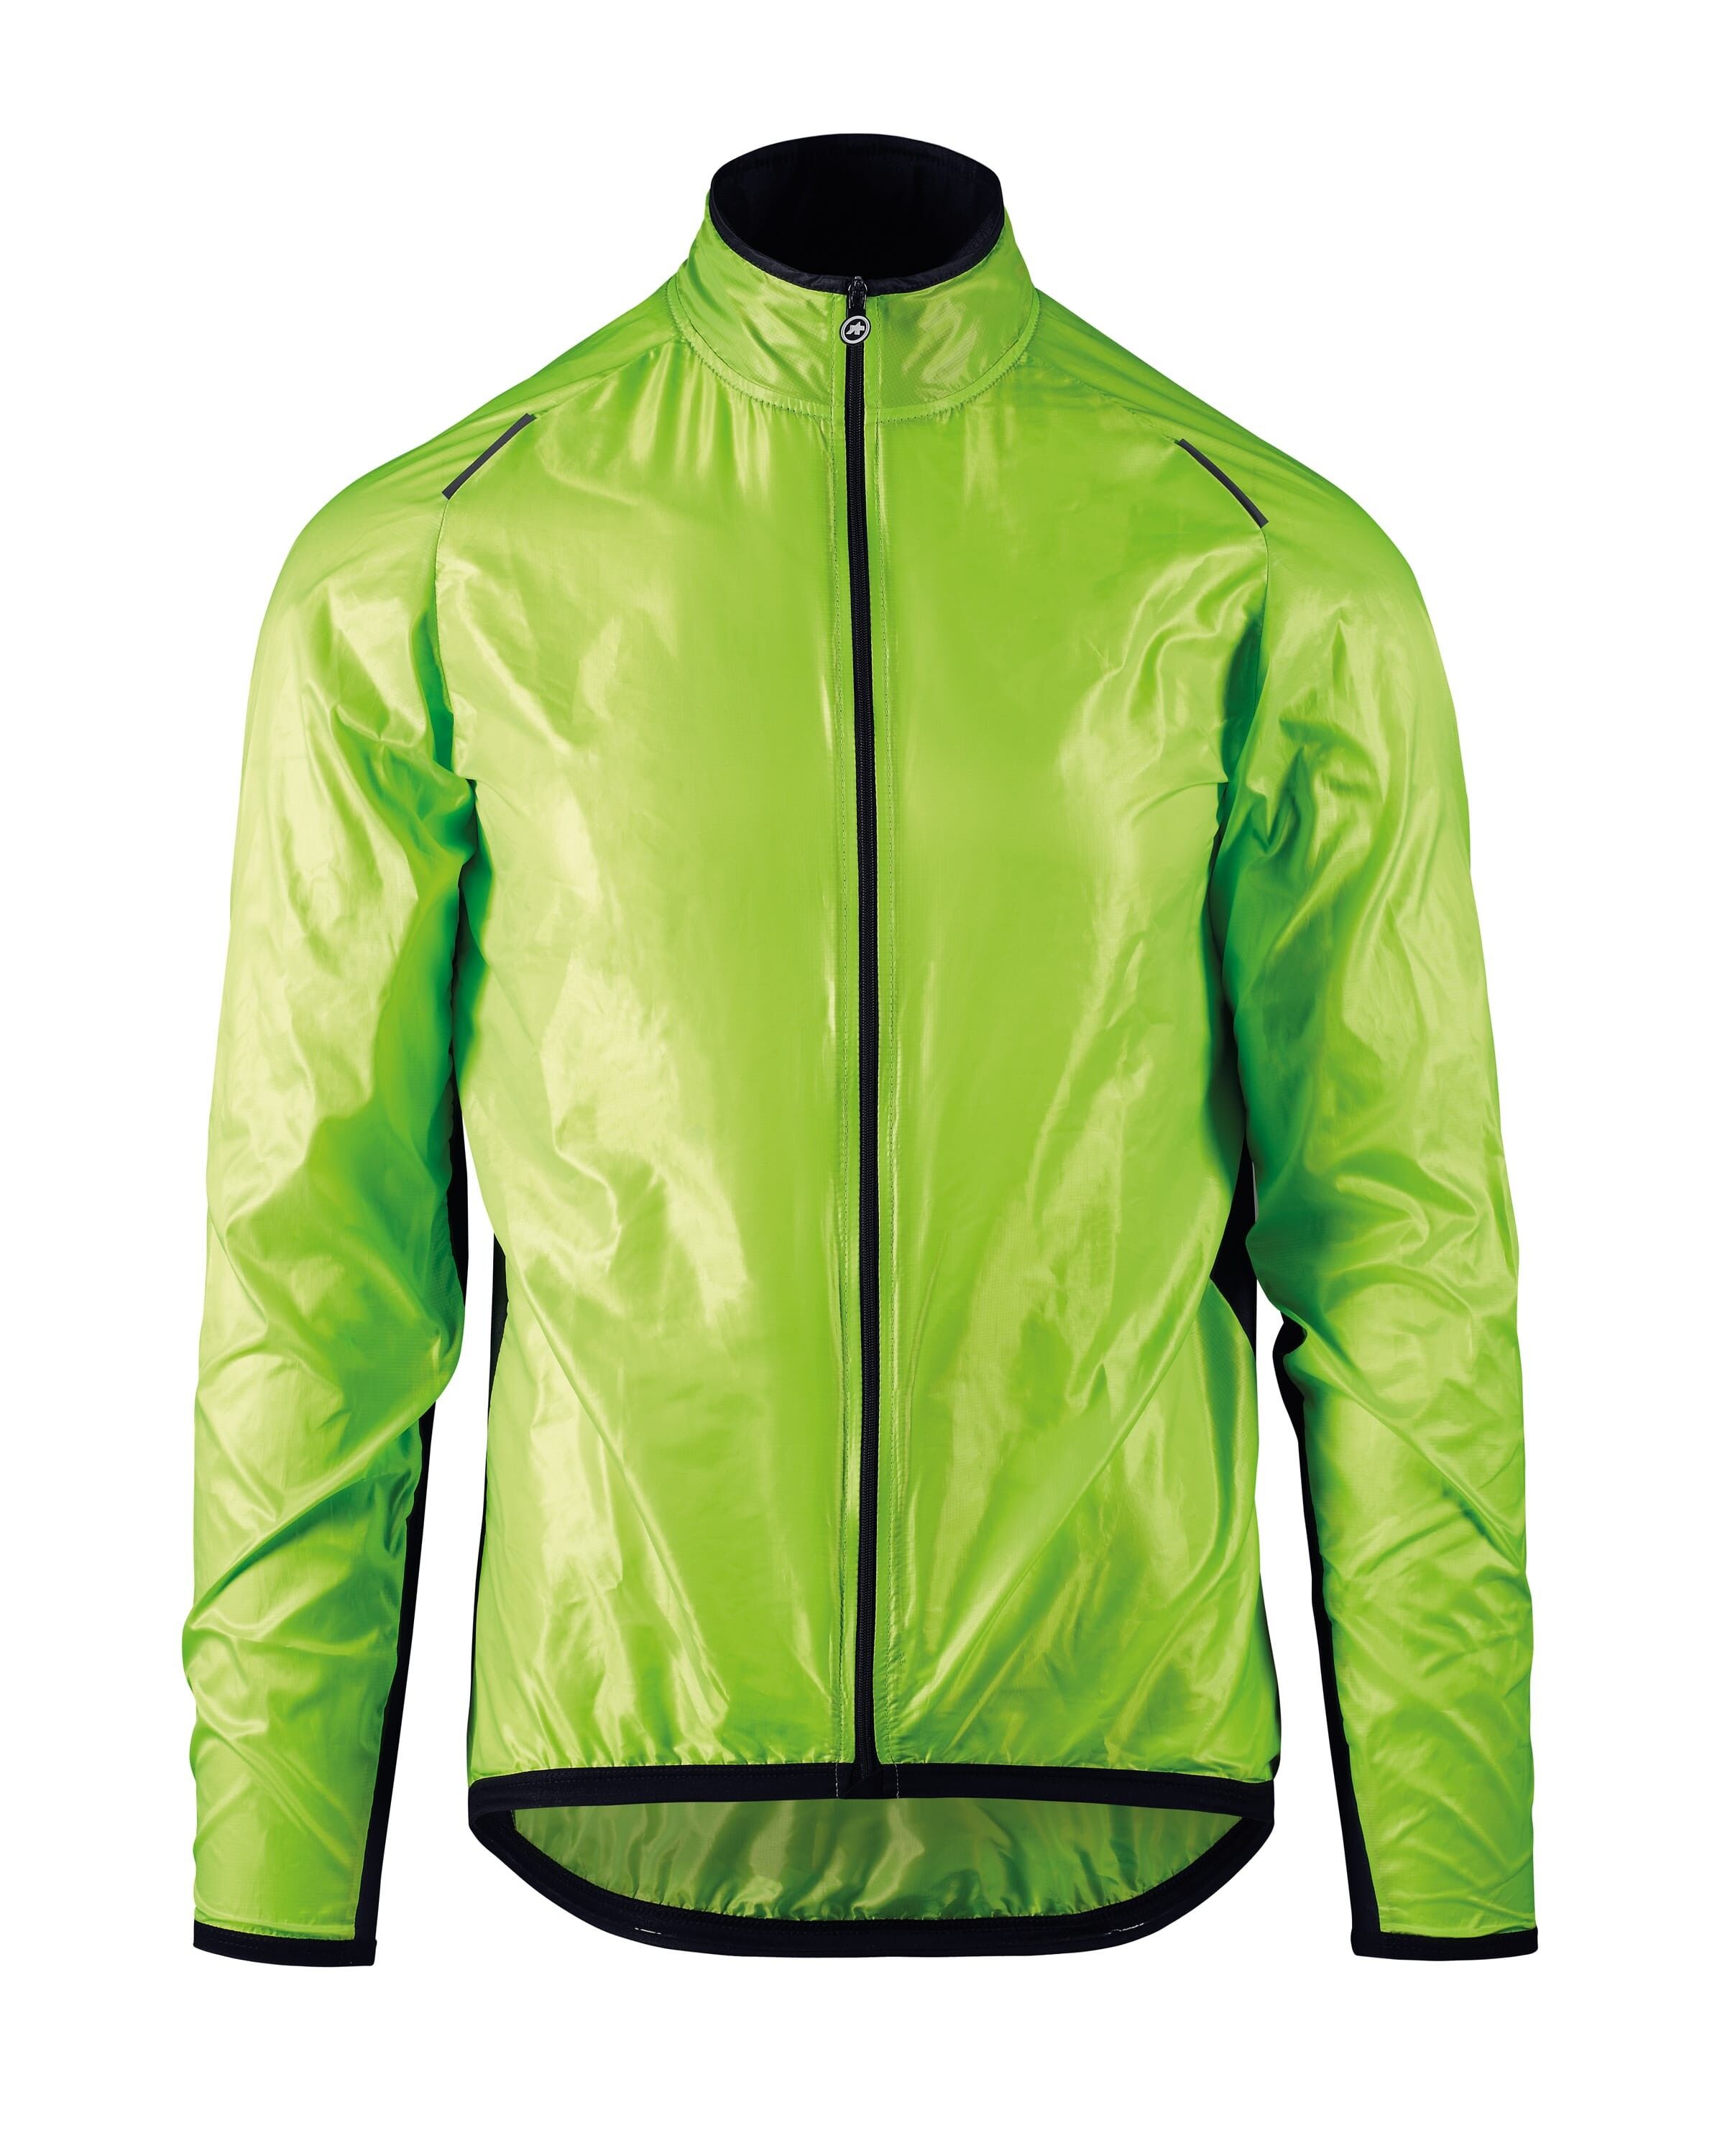 Assos Mille GT Wind Jacket - Giacca a vento ciclismo - Uomo